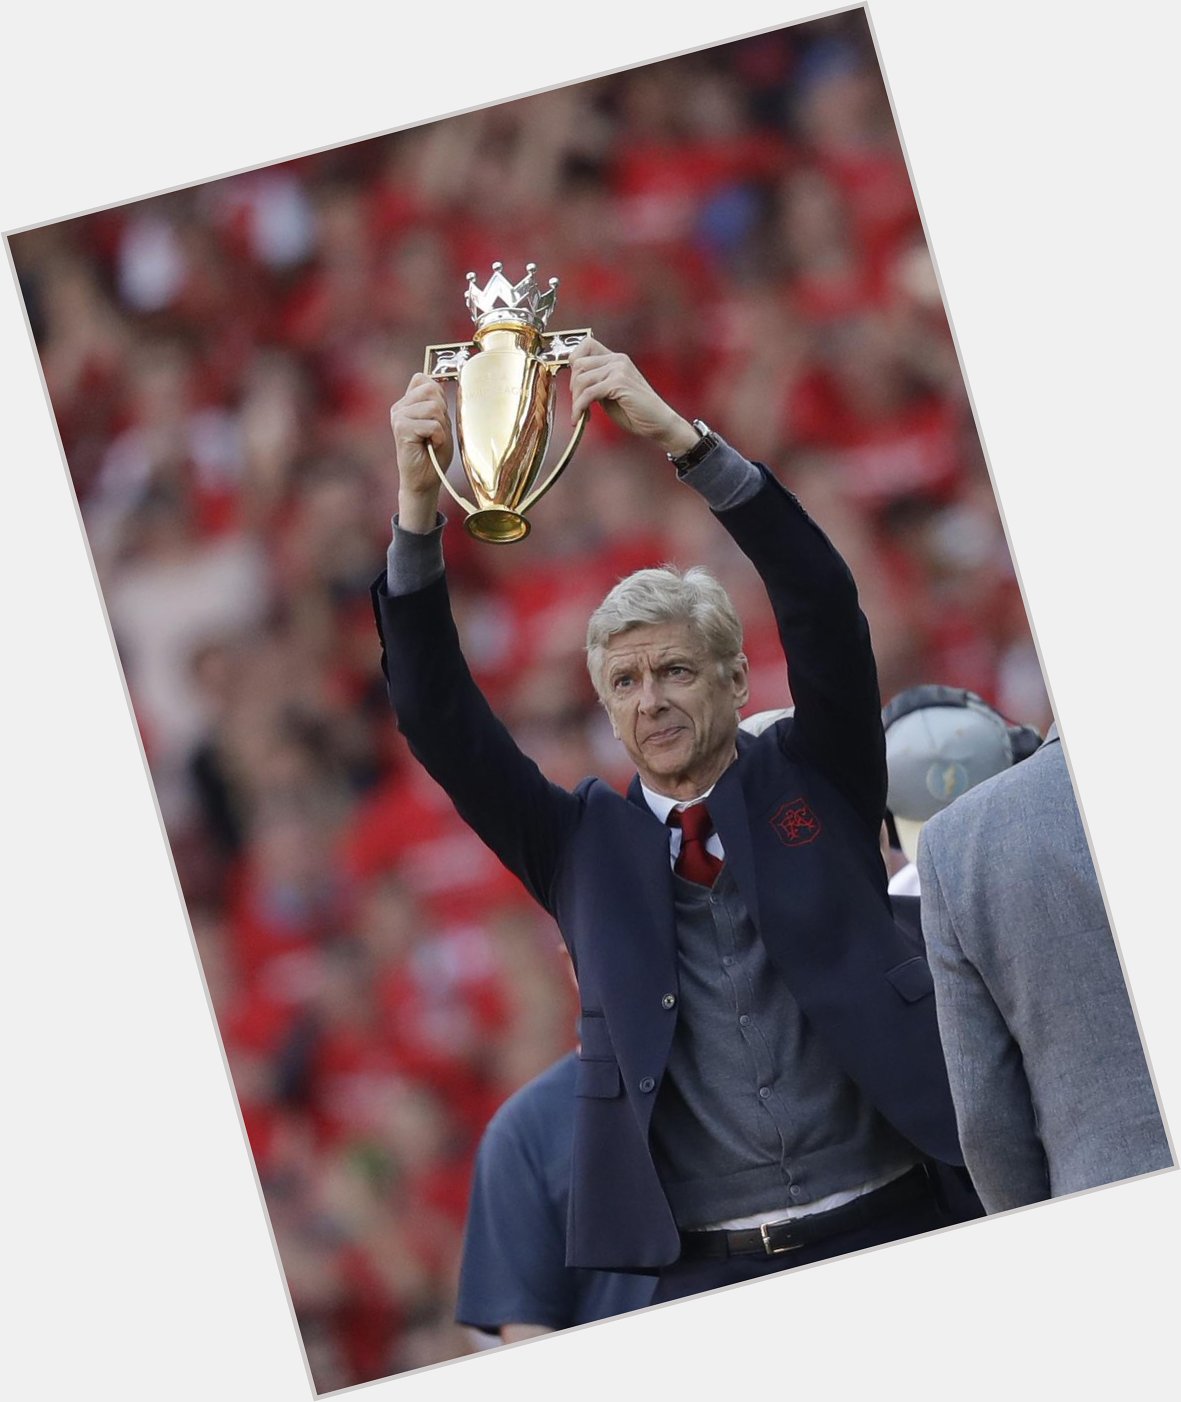 Happy Birthday to Arsene Wenger. Arguably the greatest Arsenal manager of all time 